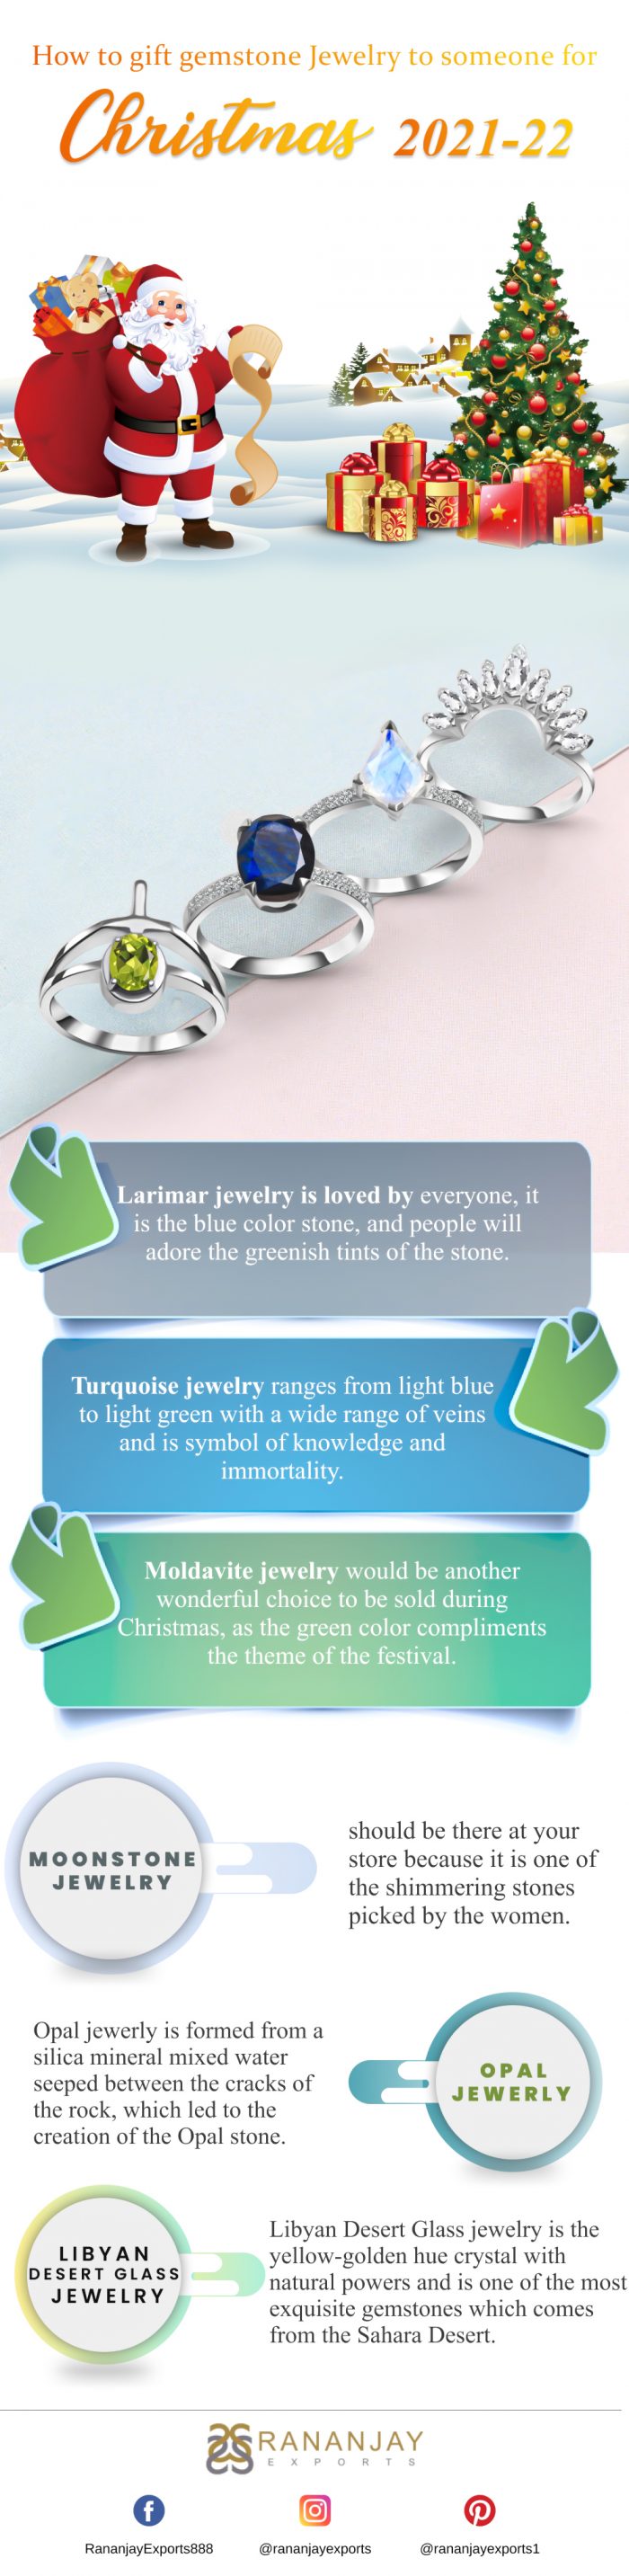 How to Gift Gemstone Jewelry to Someone For Christmas